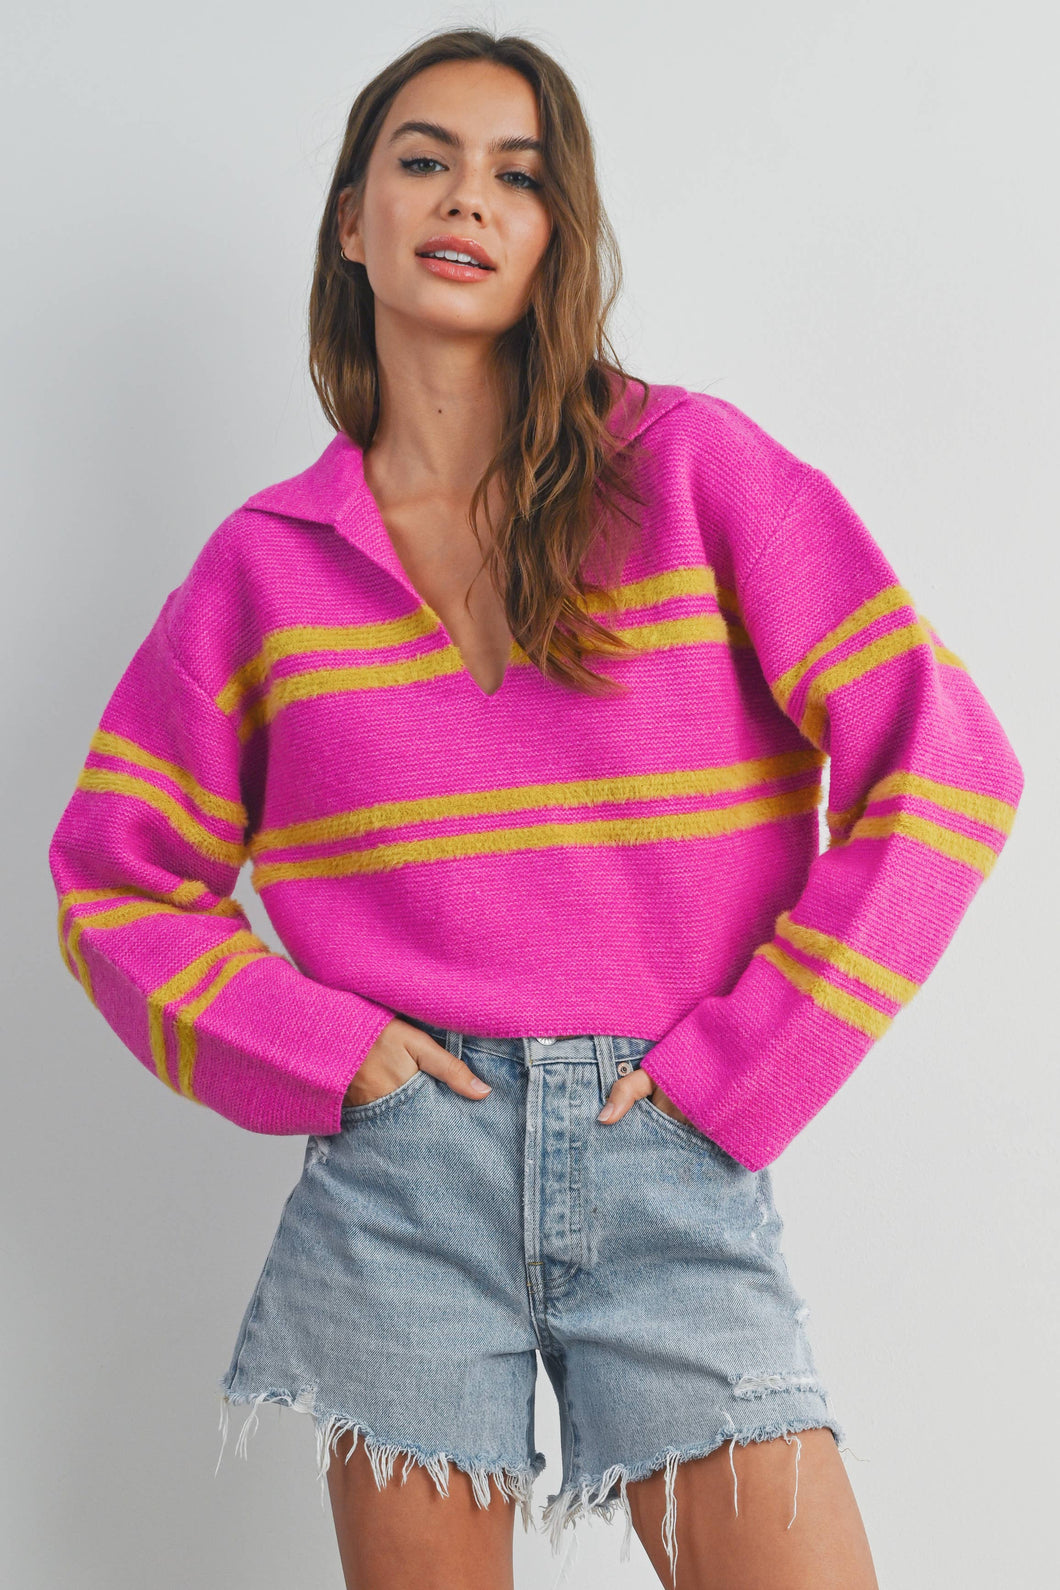 You Know Me Magenta Mustard Striped Sweater